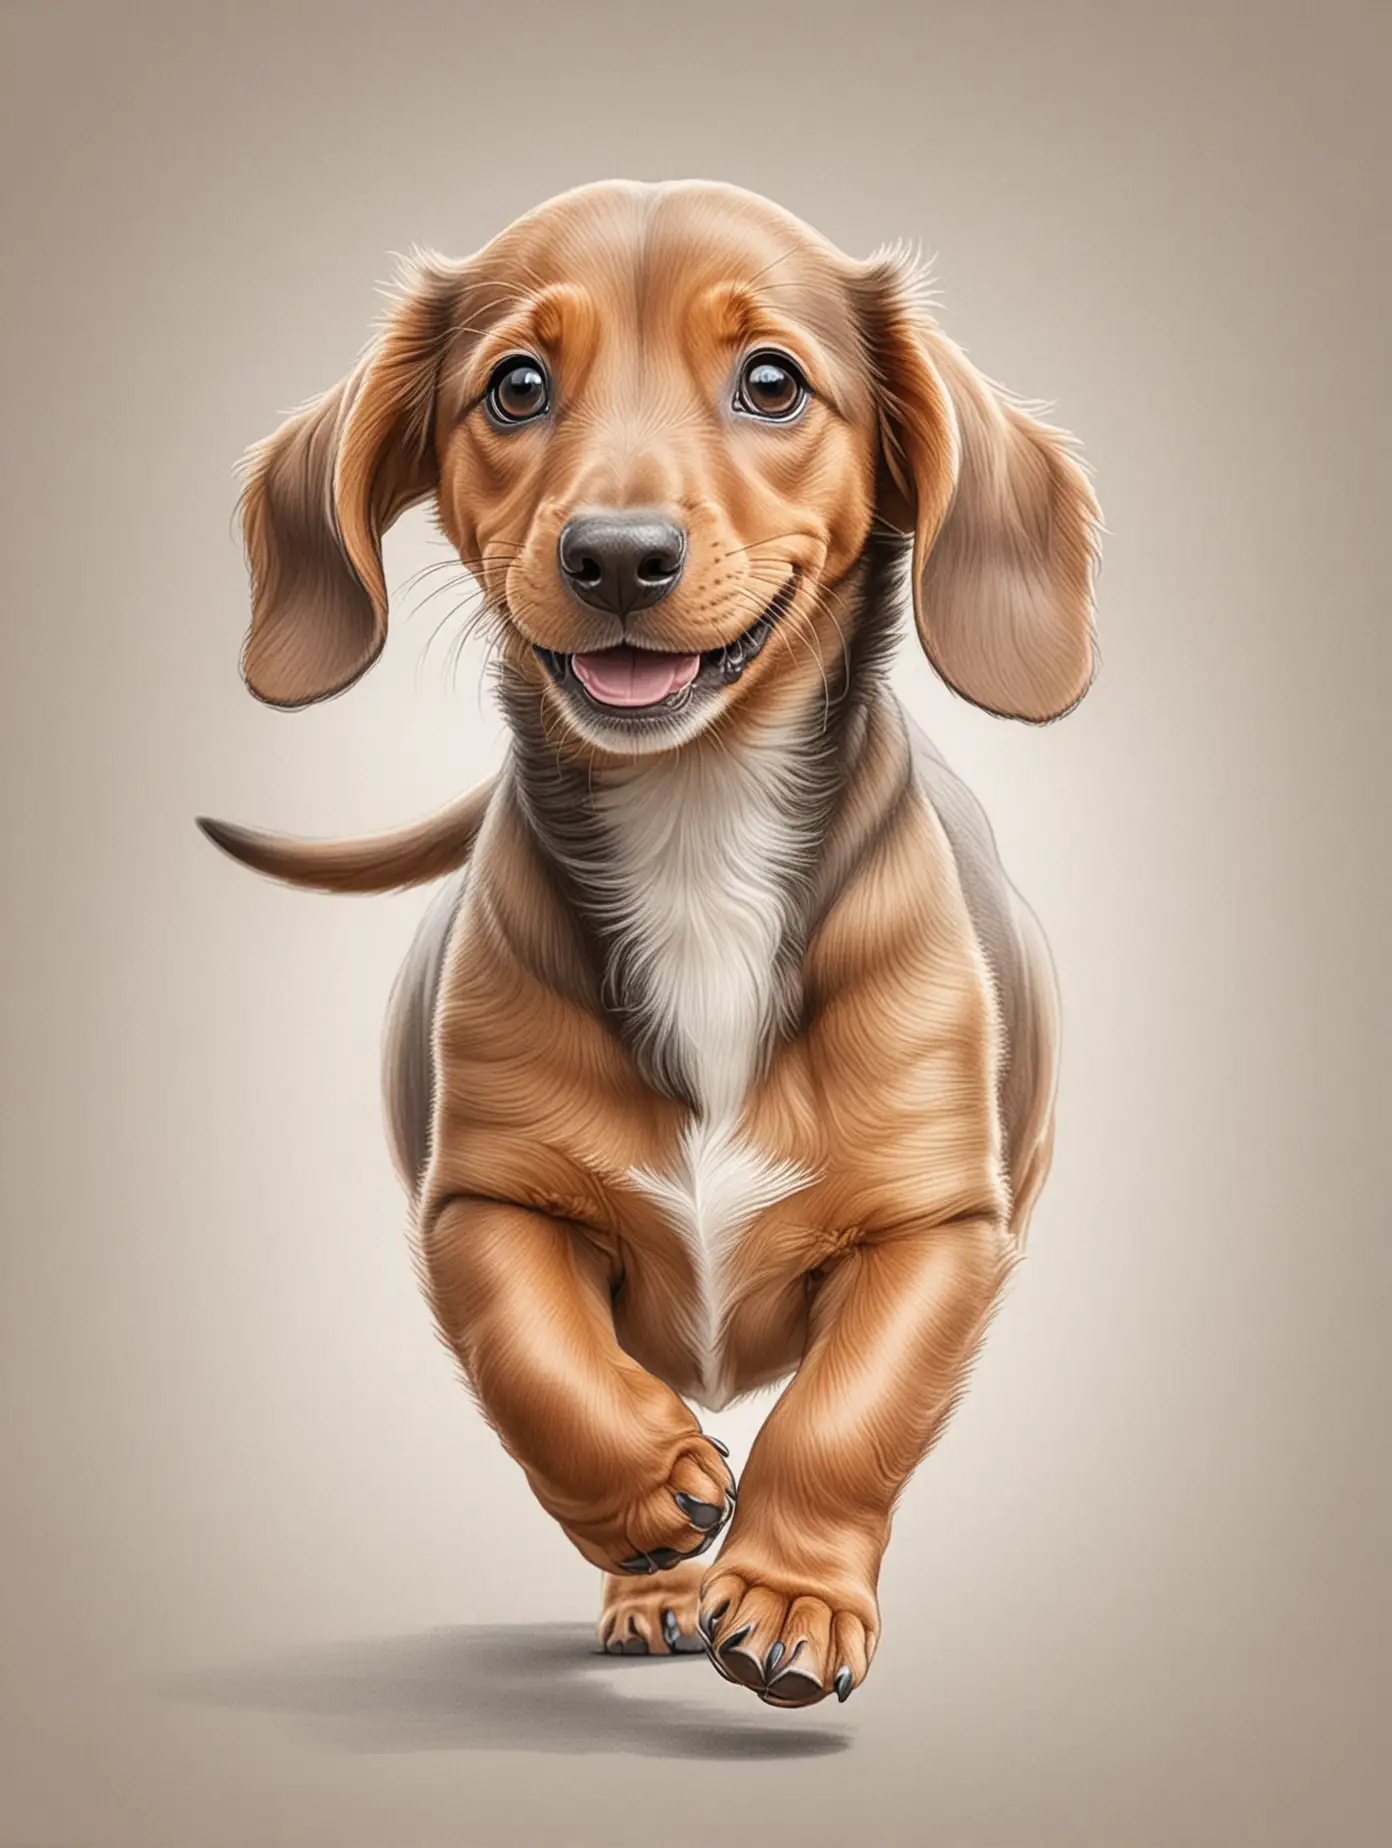 Adorable Dachshund Puppy Sketch for Childrens Coloring Book